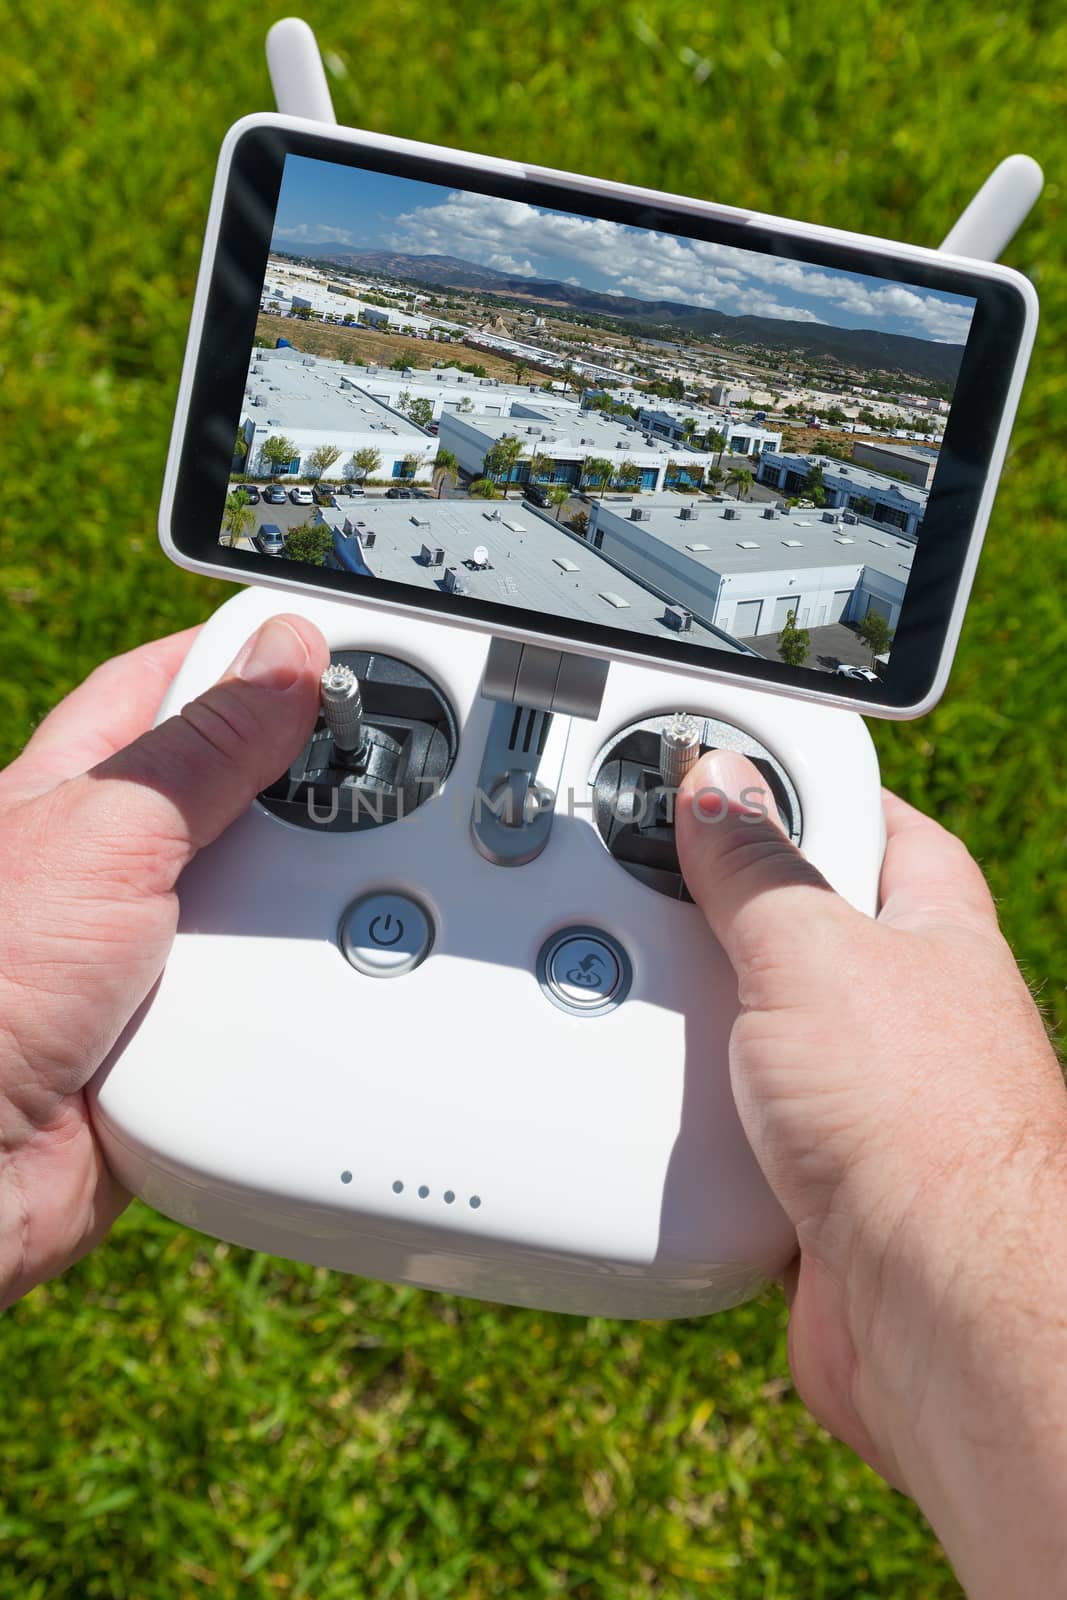 Hands Holding Drone Quadcopter Controller With Indutrial Buildings on Screen. by Feverpitched